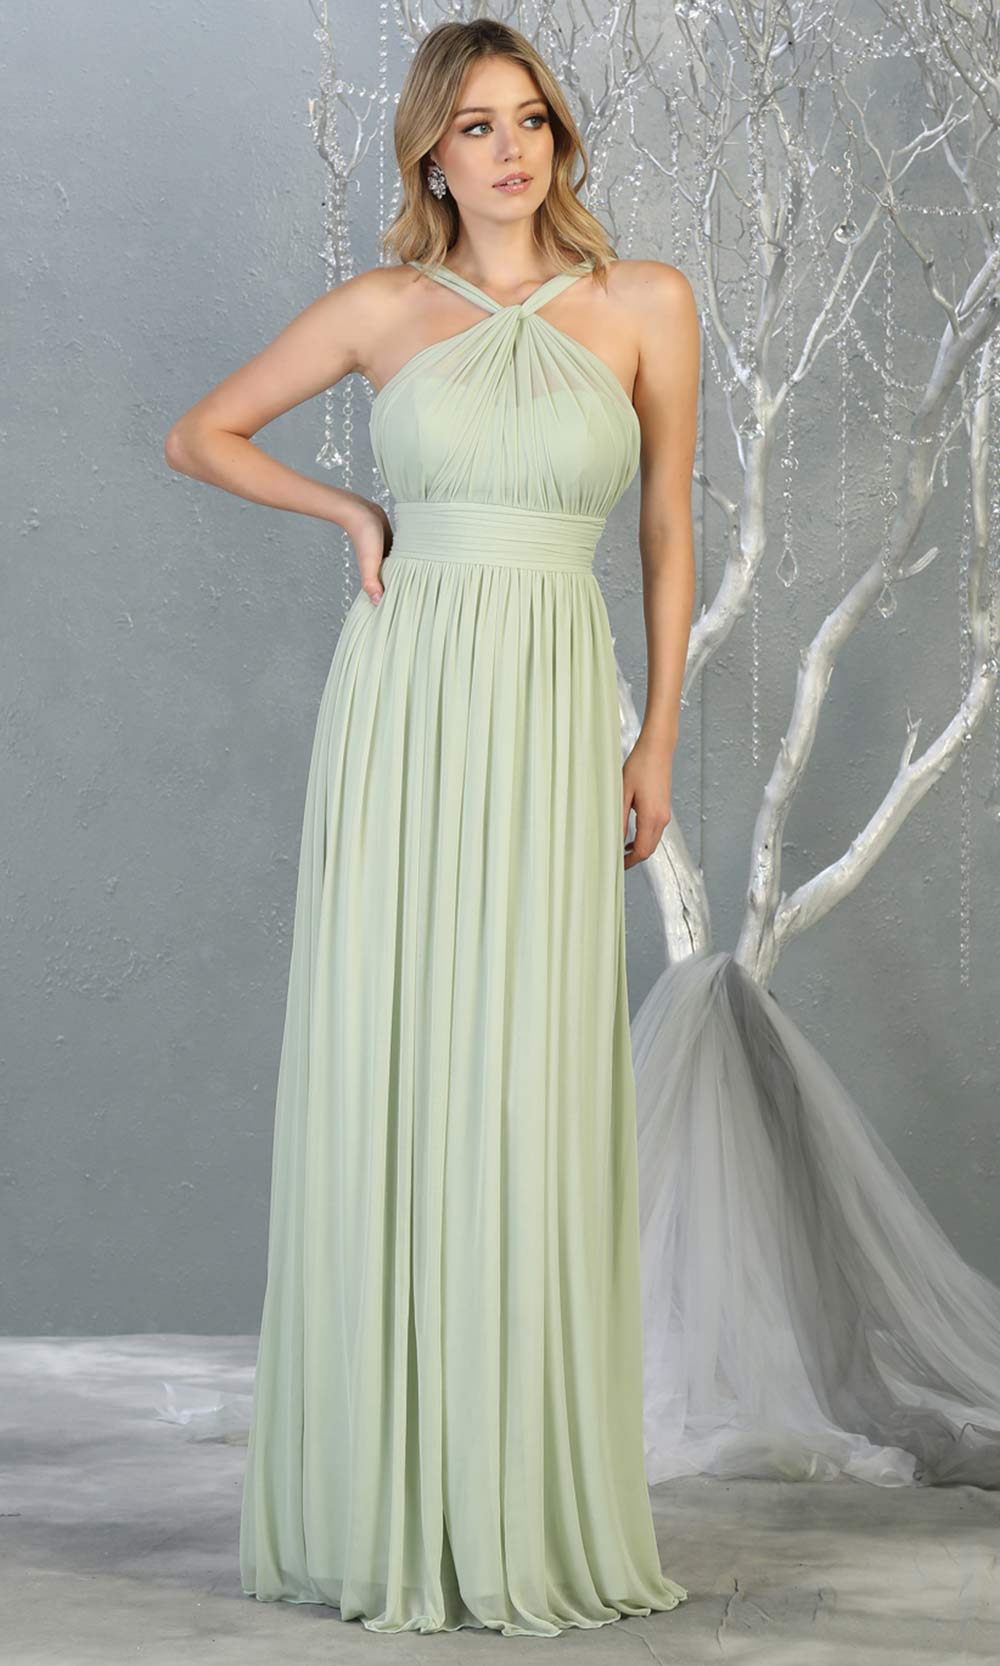 Mayqueen MQ1769 long sage green flowy dress with high neck. This simple light green evening party dress is perfect for bridesmaids, wedding guest dress, simple prom dress. Plus sizes available.jpg